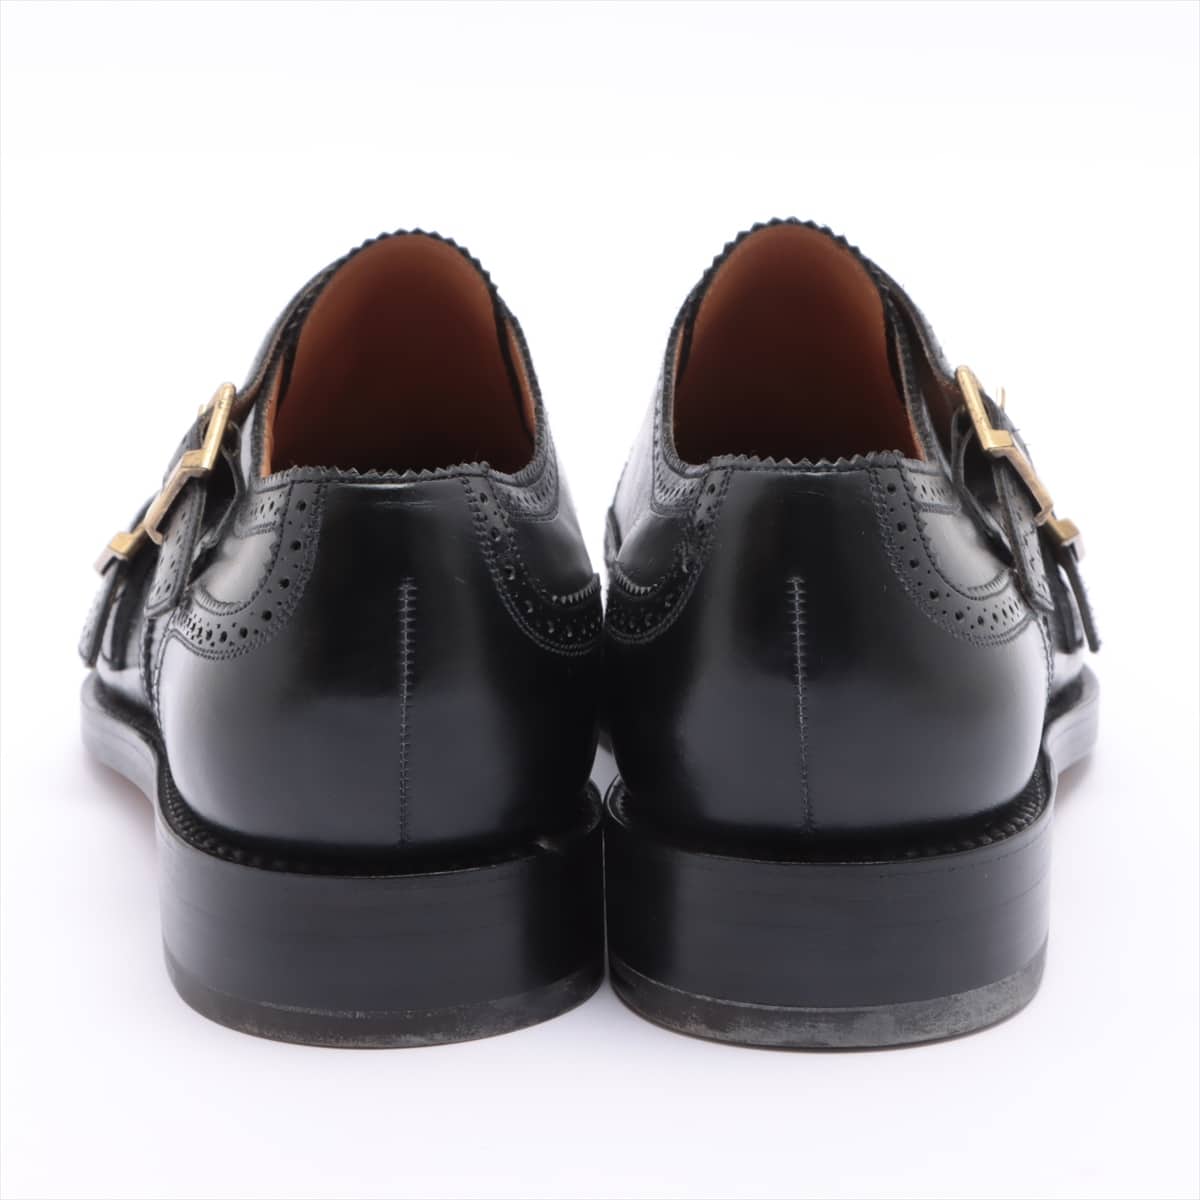 J. M. Weston Leather Shoes 8 Men's Black wingtip Double monk With genuine shoe tree There is insole repair